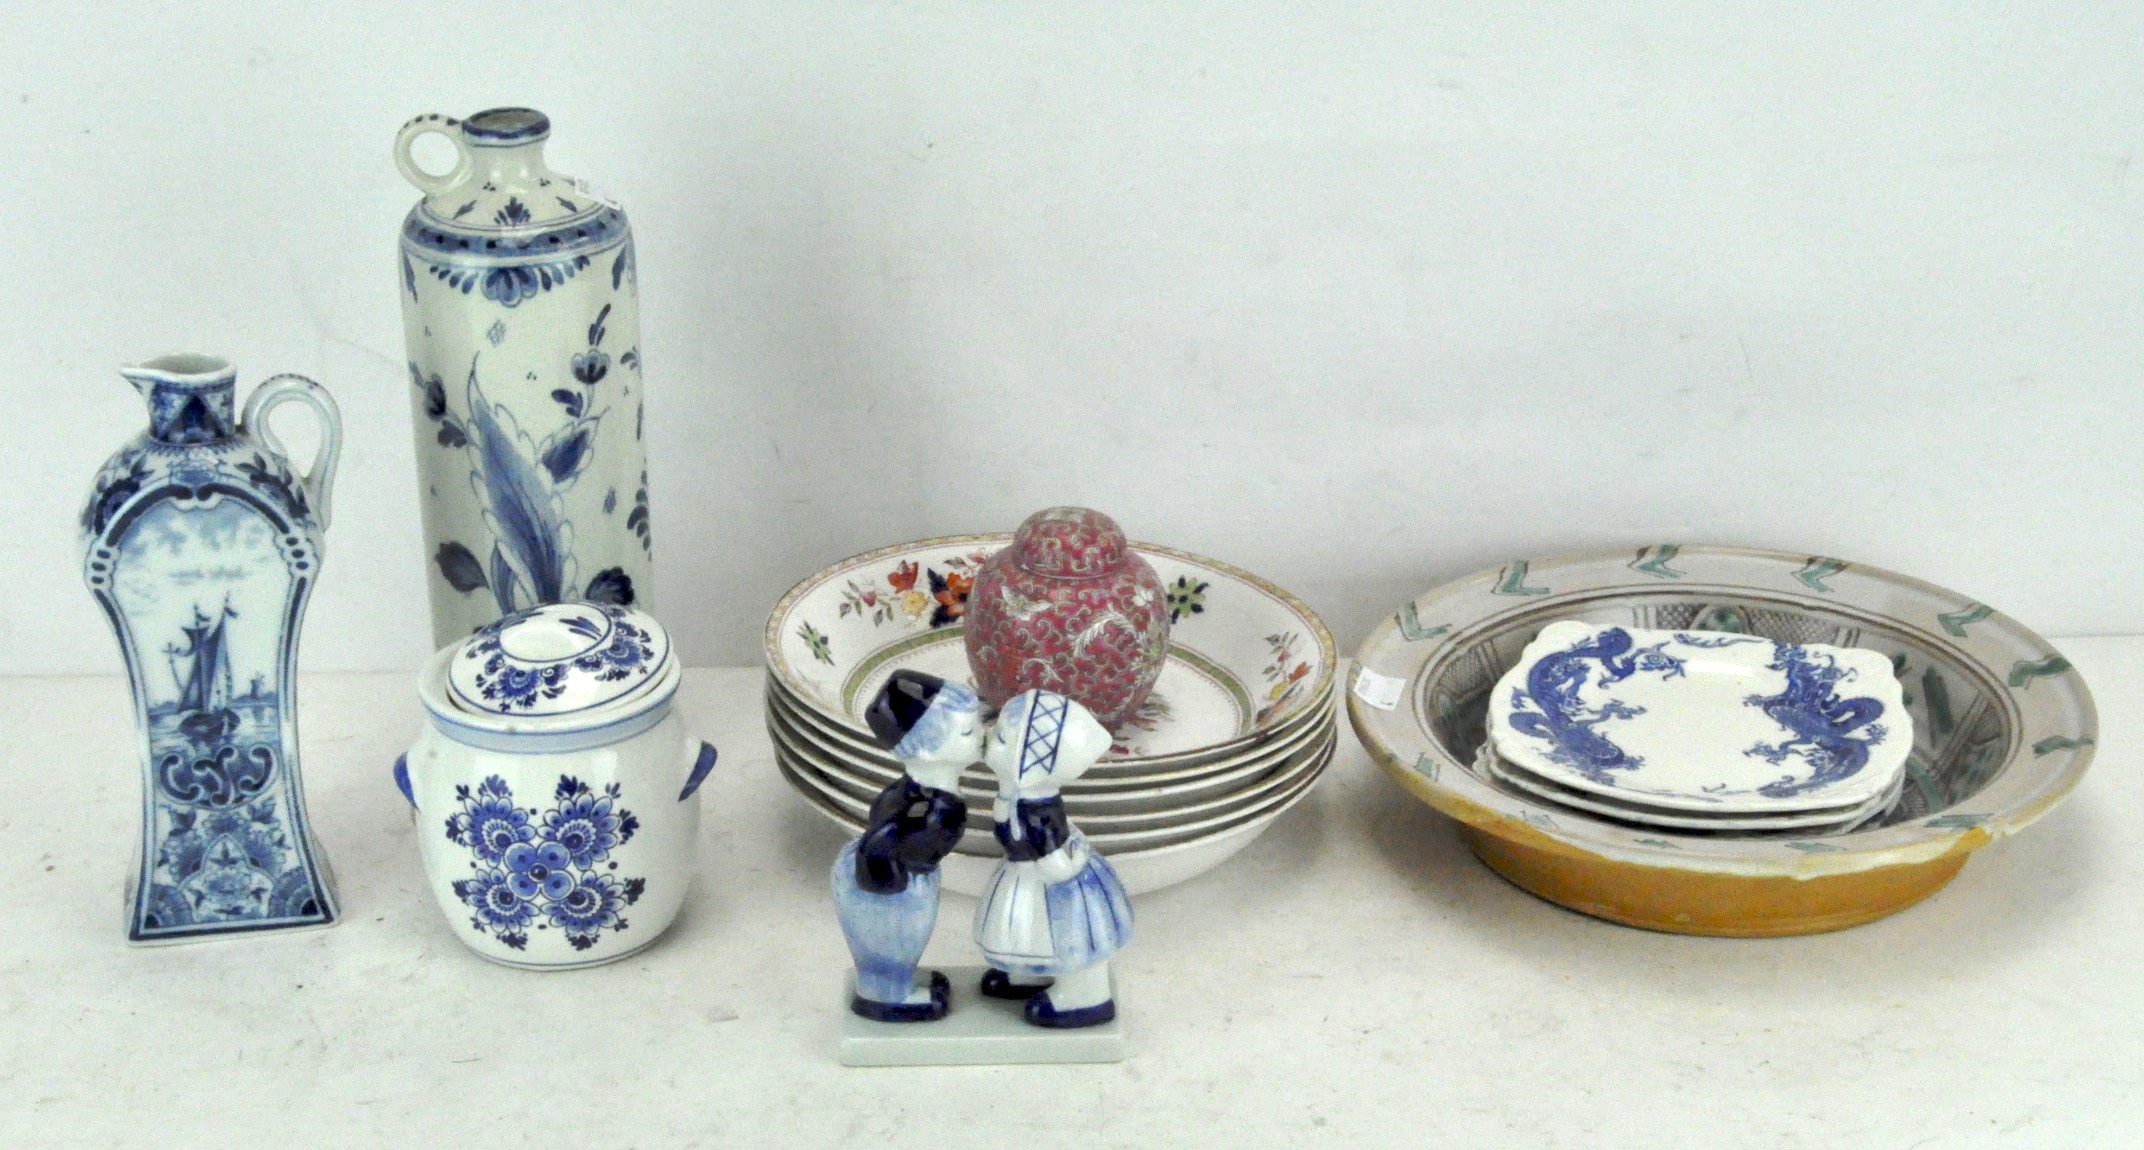 A collection of Delft pottery and other ceramics